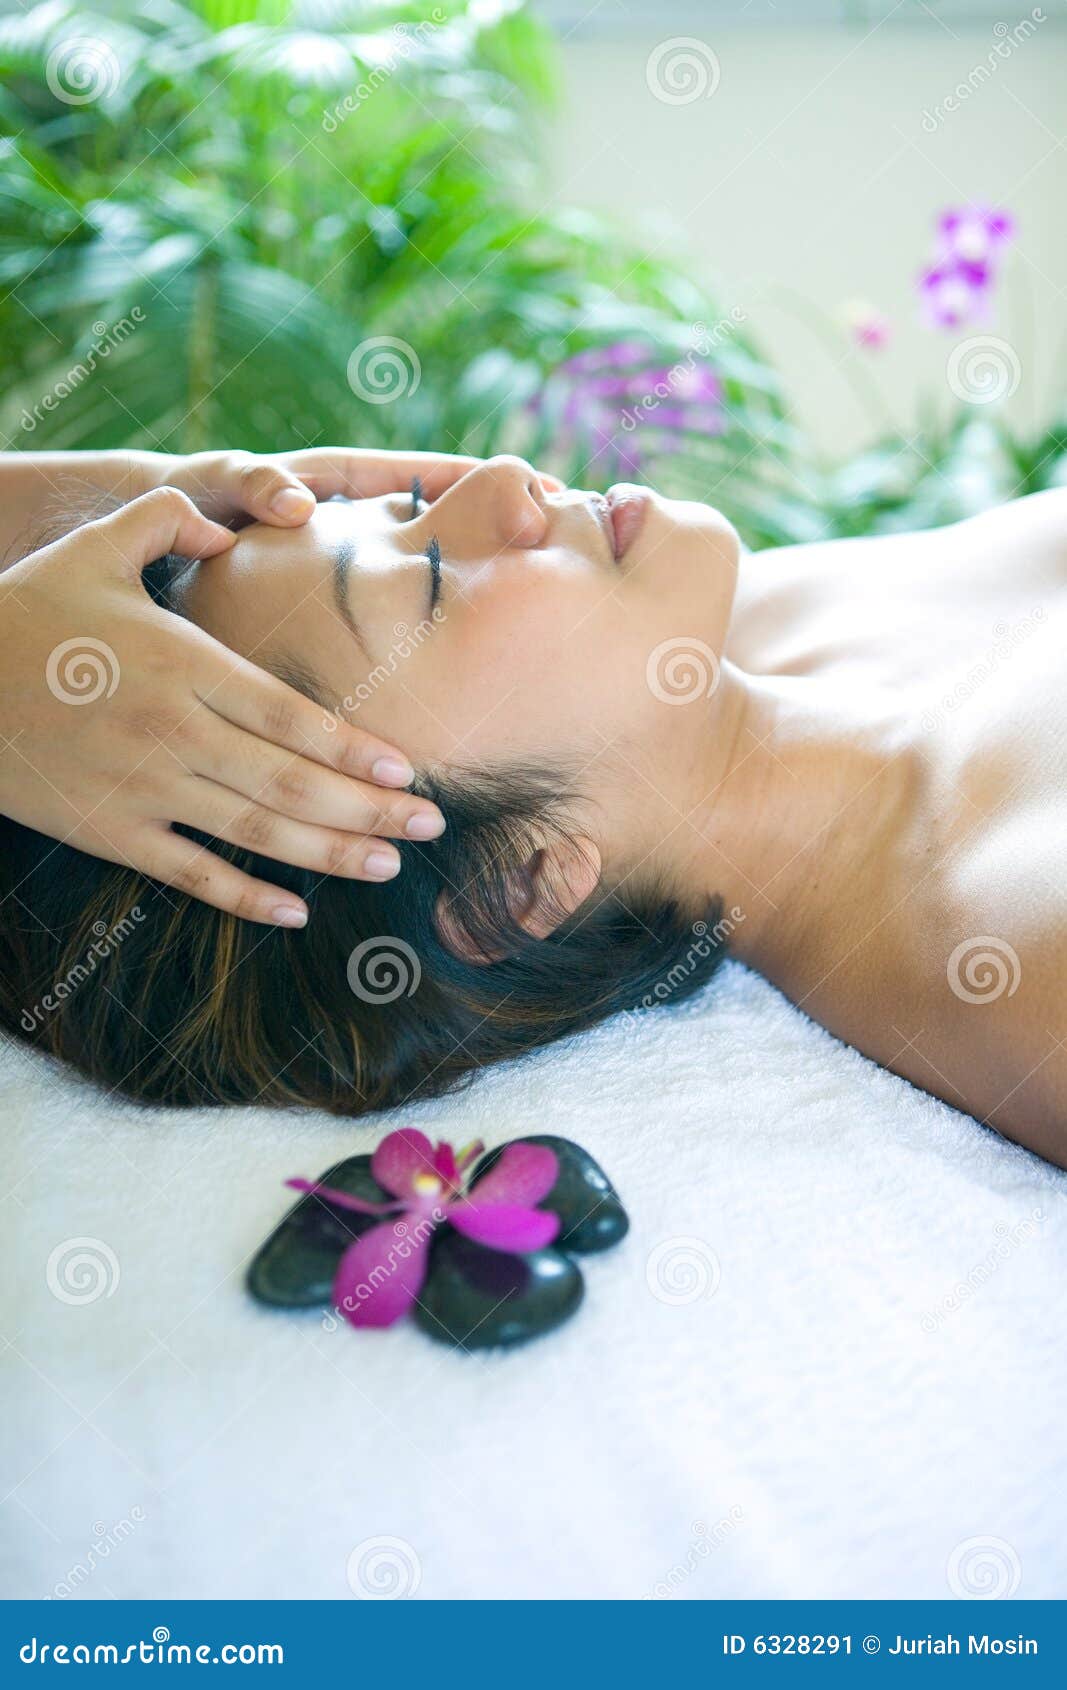 Woman Restful While Being In Head Massage Stock Image Image Of Makeup